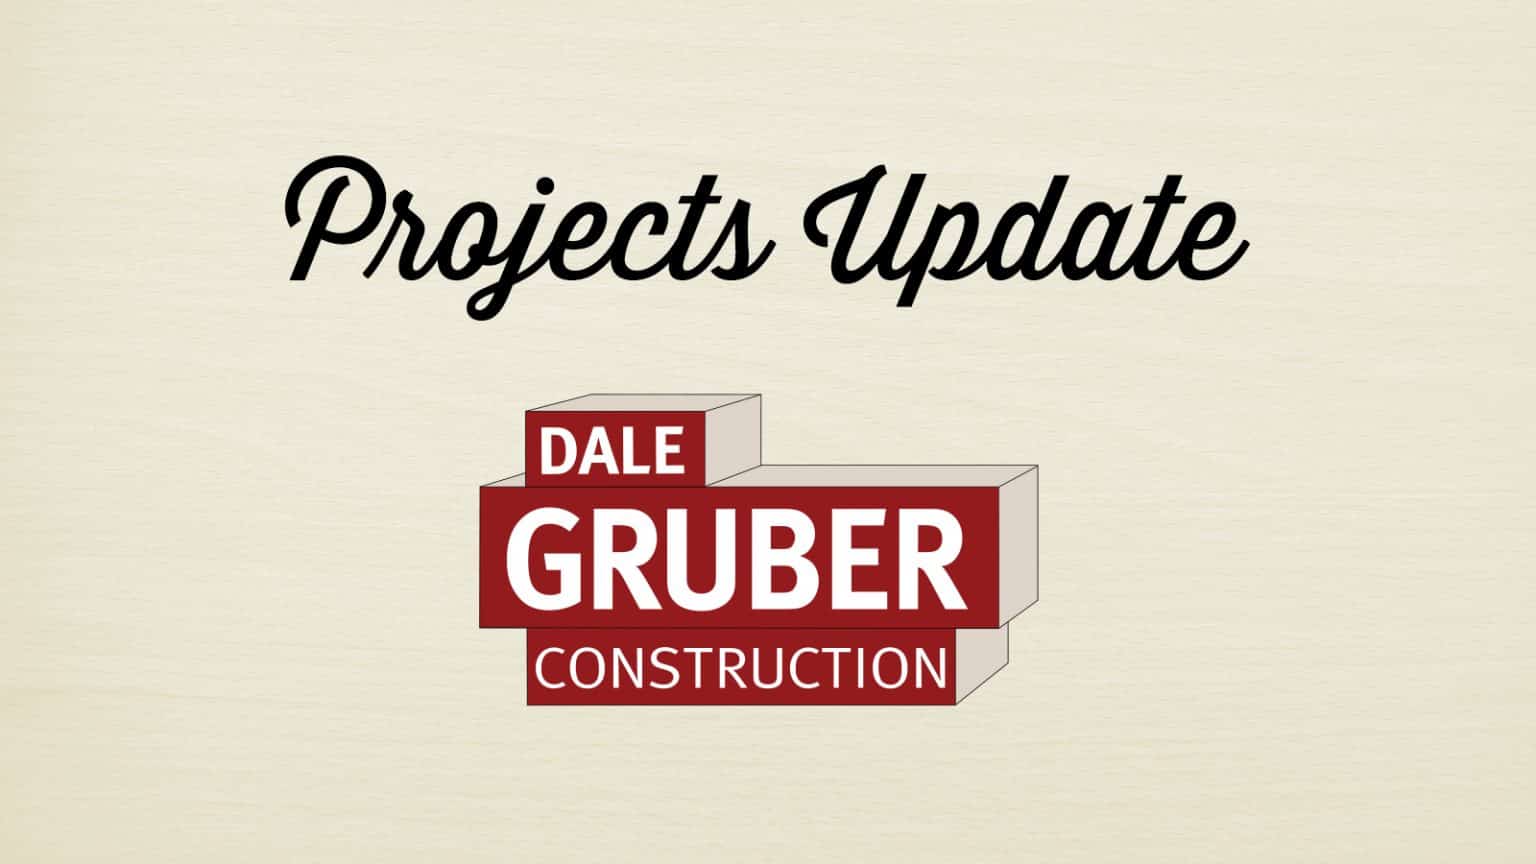 DGC Projects Update!